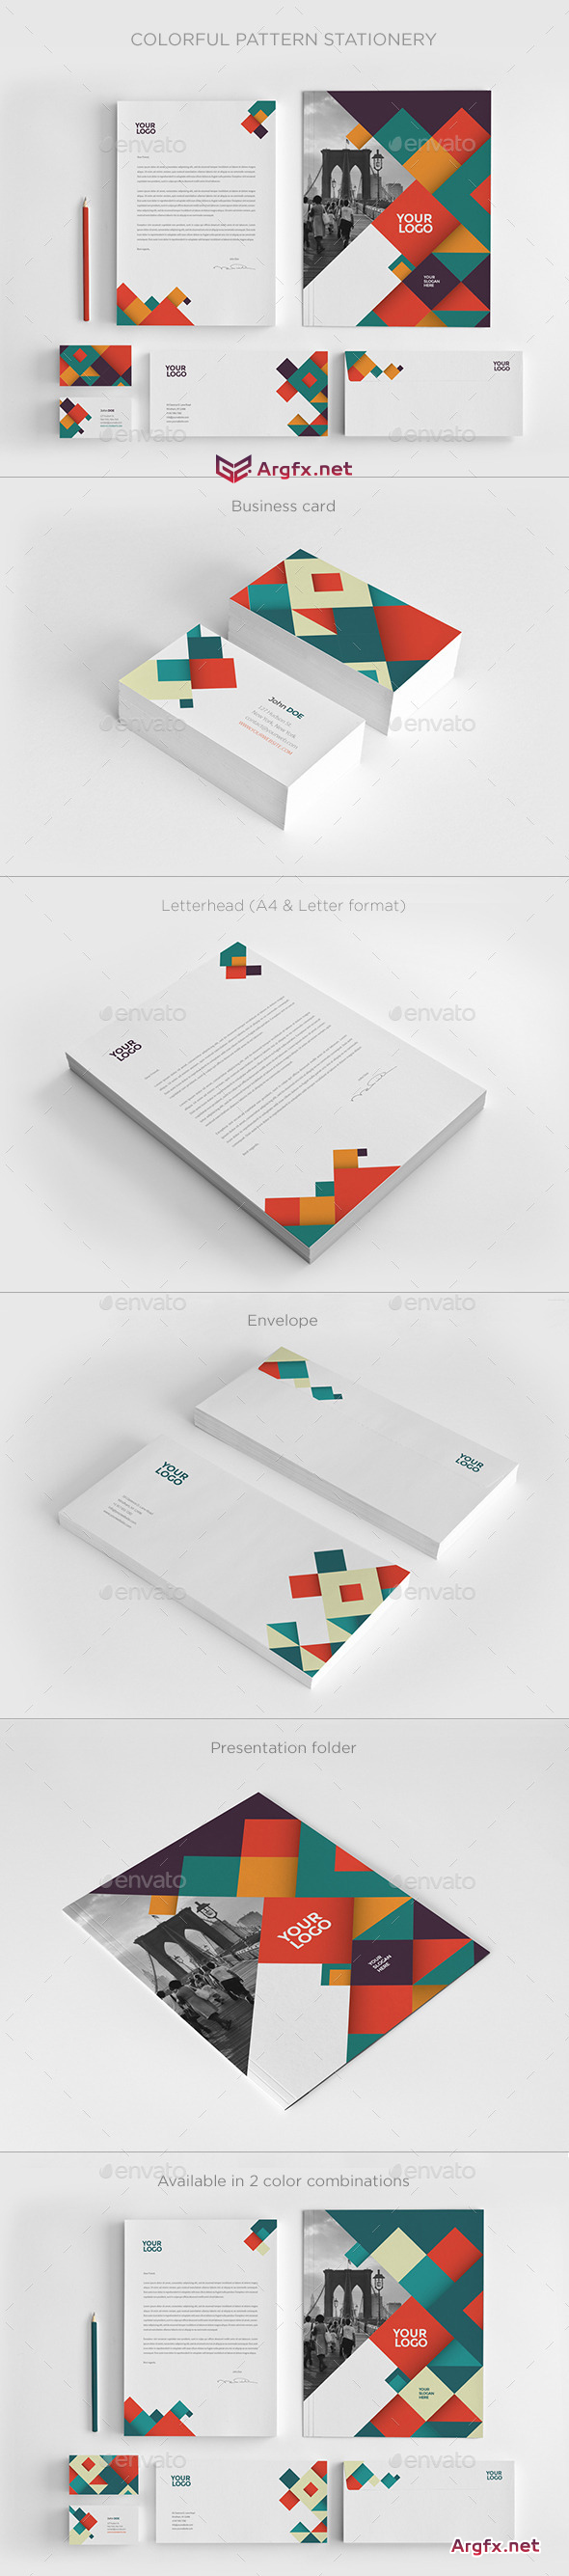  GraphicRiver - Colorful Pattern Stationery 11736367